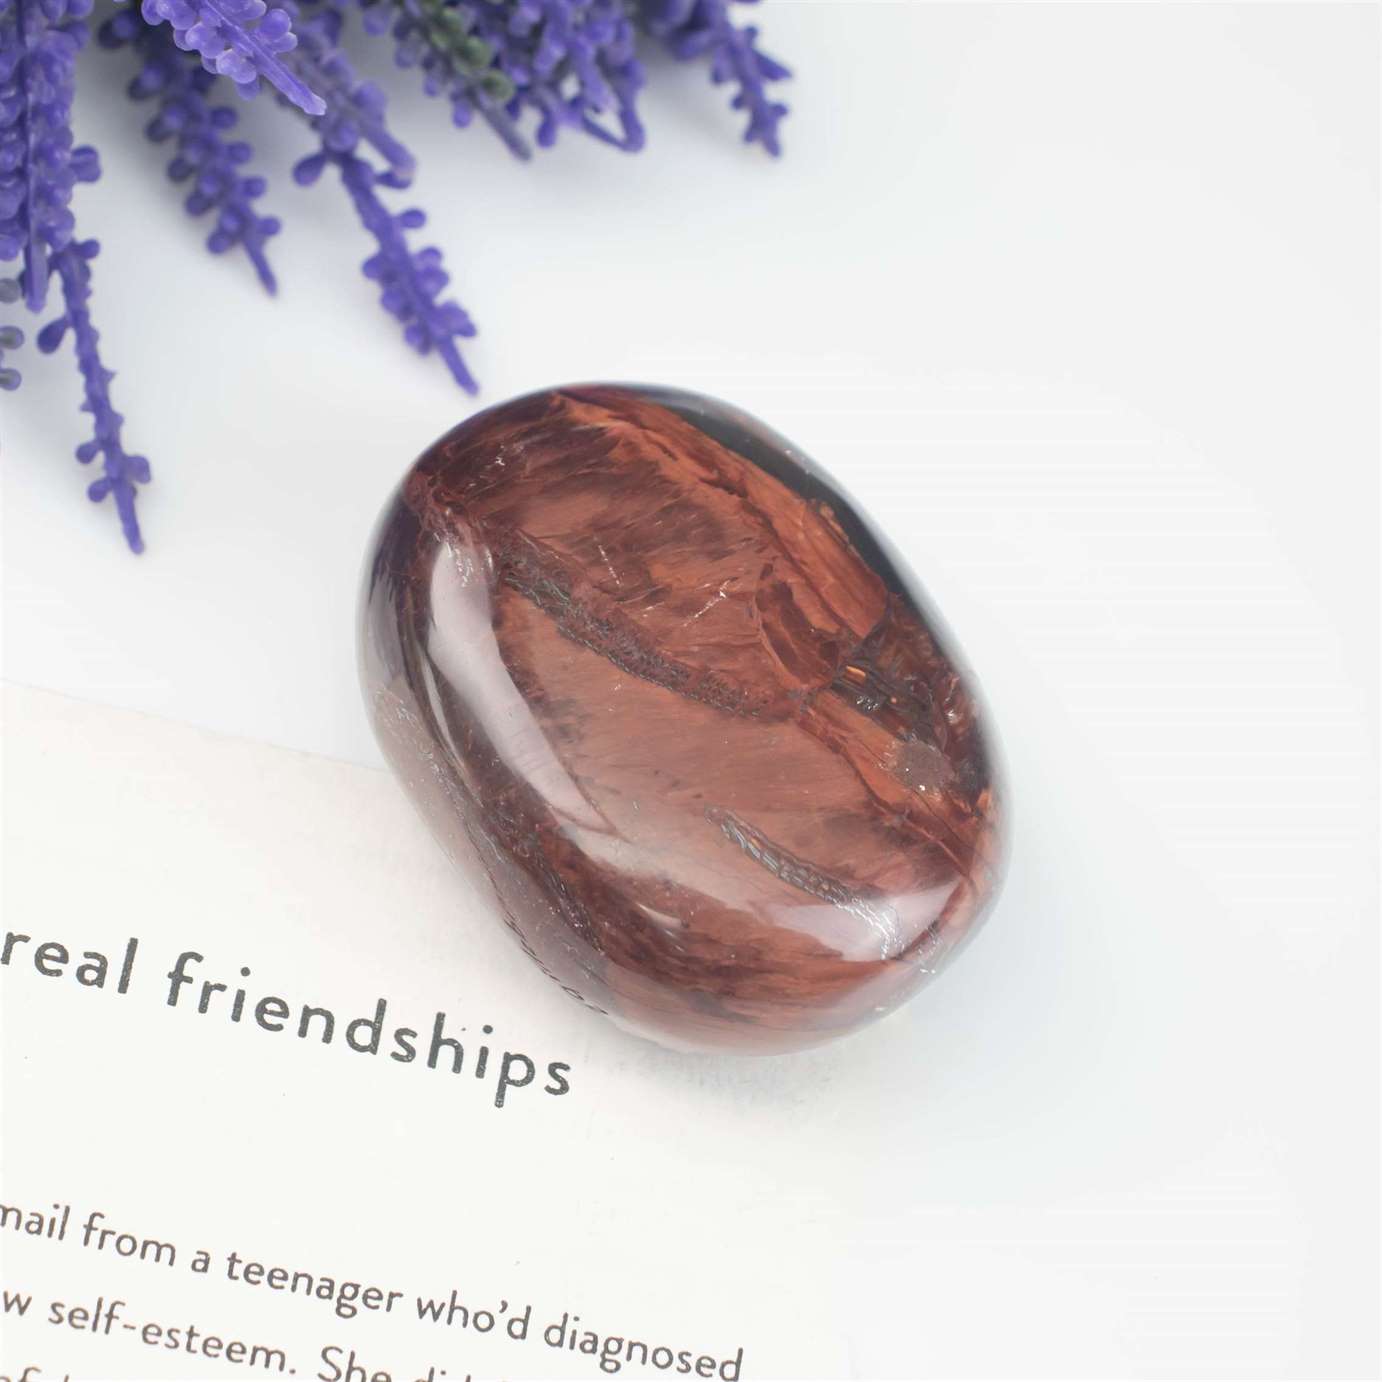 Red Tiger Eye Crystal Palmstone (Confidence, Motivation) - TheIndianHand